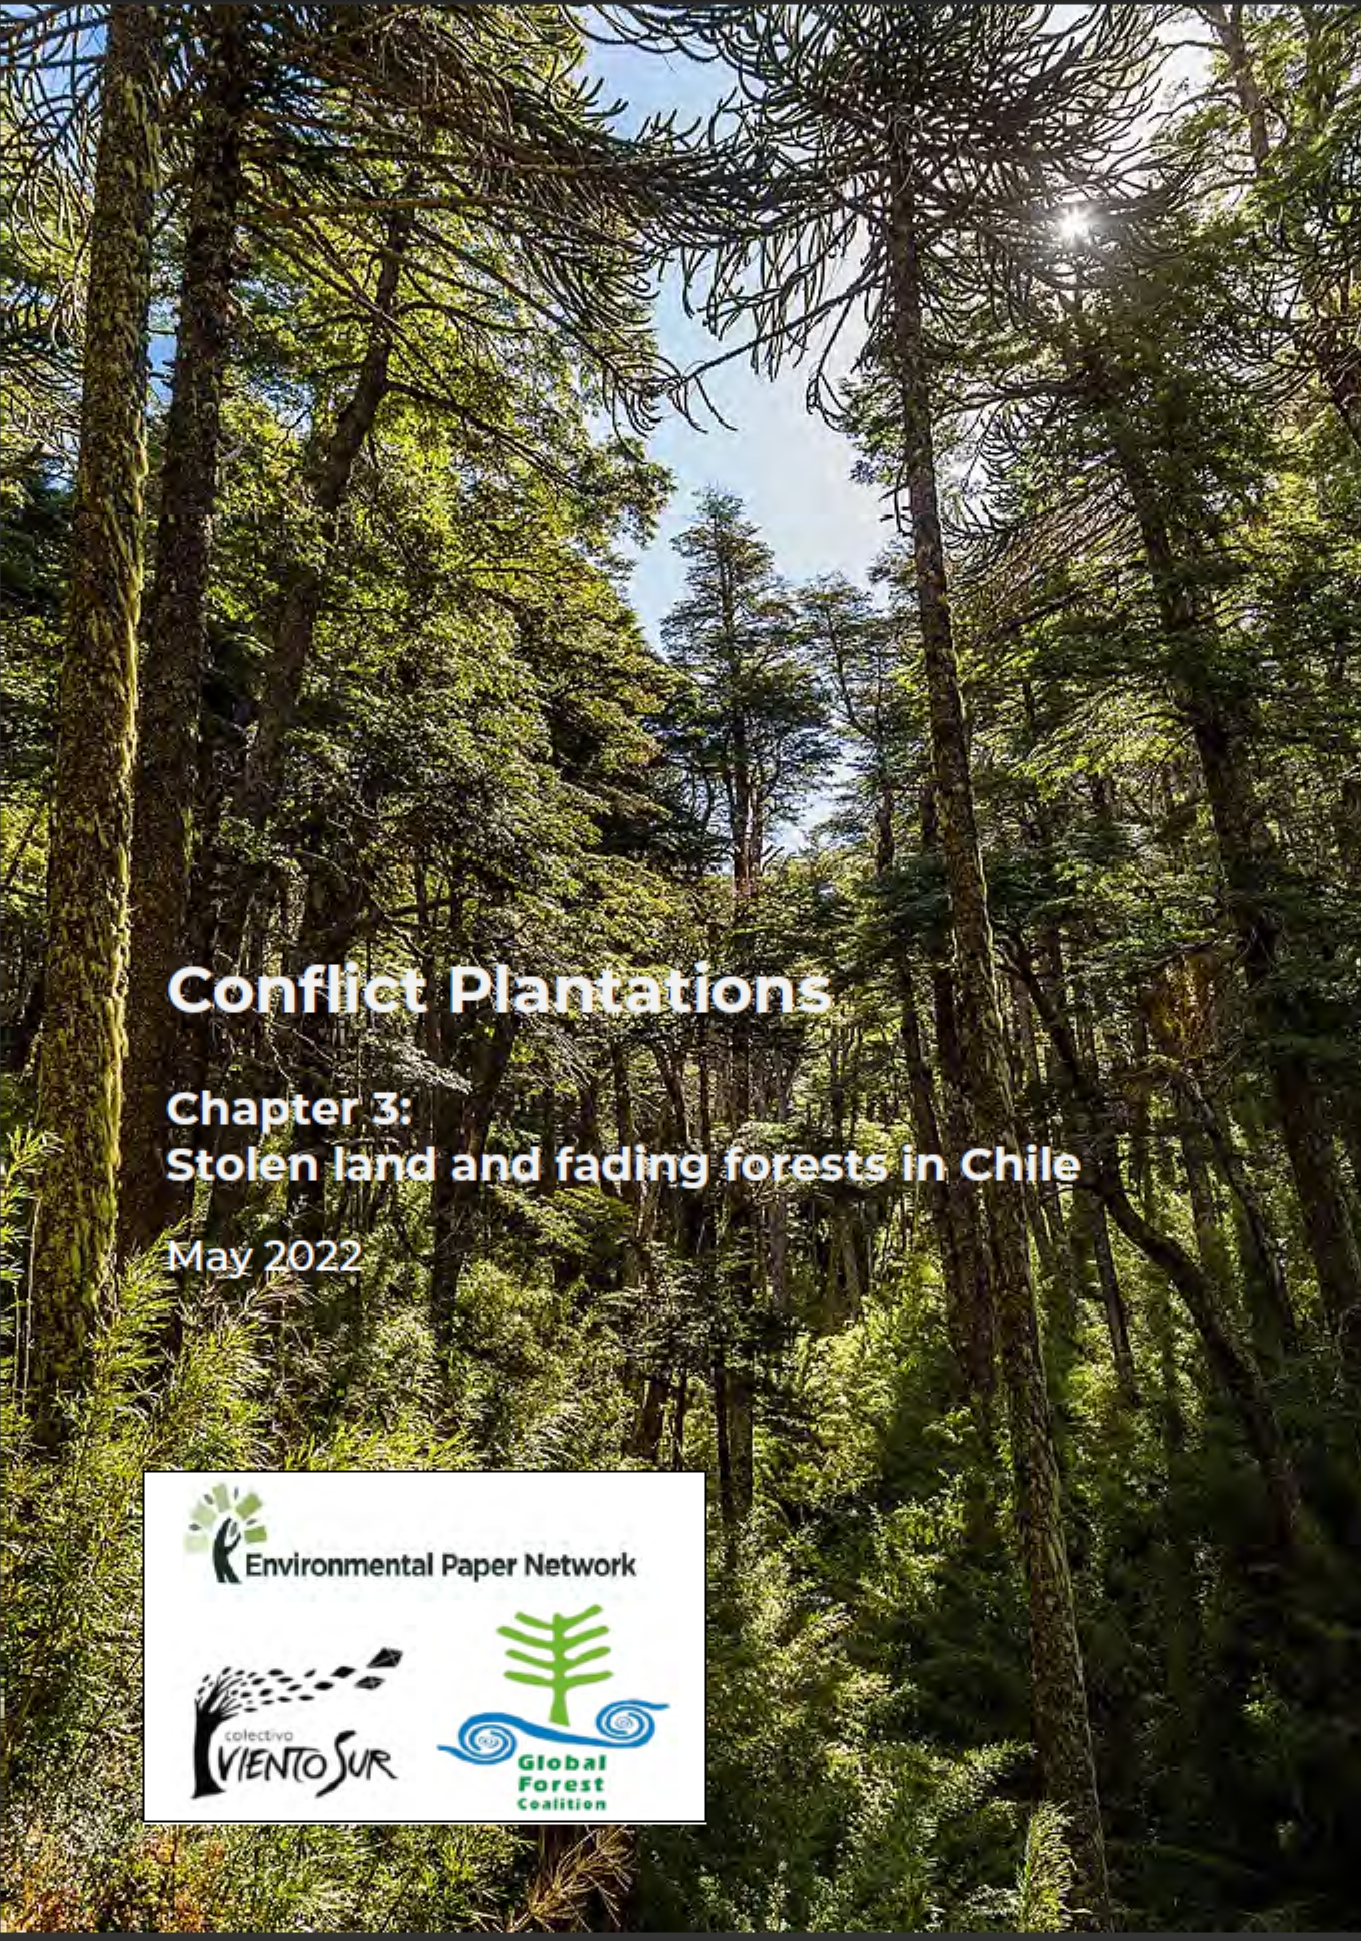 Conflict Plantations Chapter 3: Stolen land and fading forests in Chile